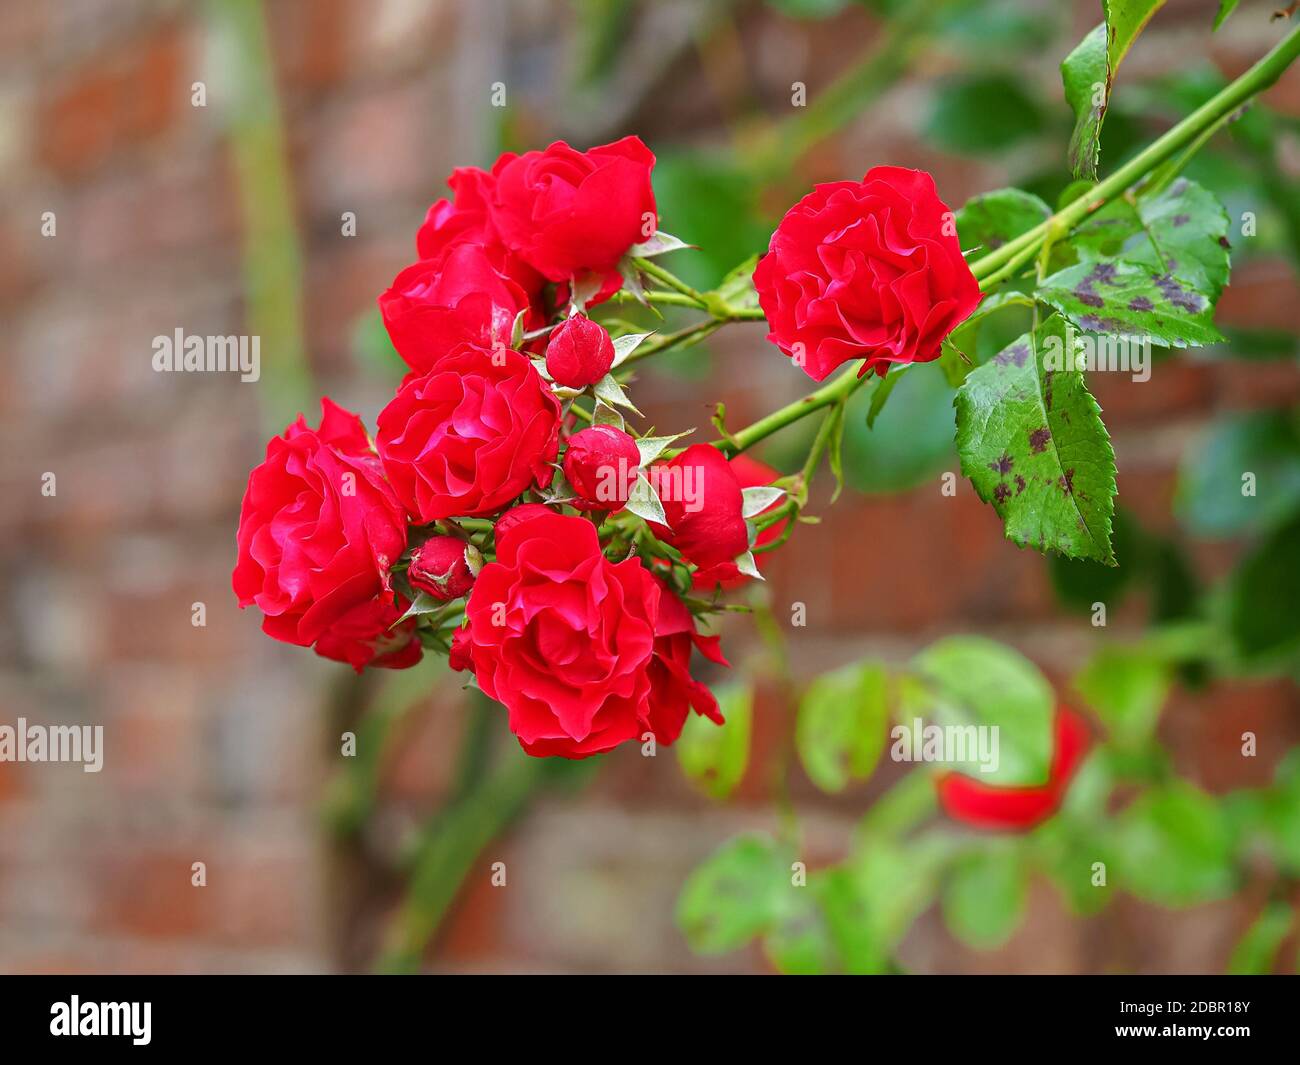 Climbing red rose blooms and green leaves against a brick wall Stock Photo